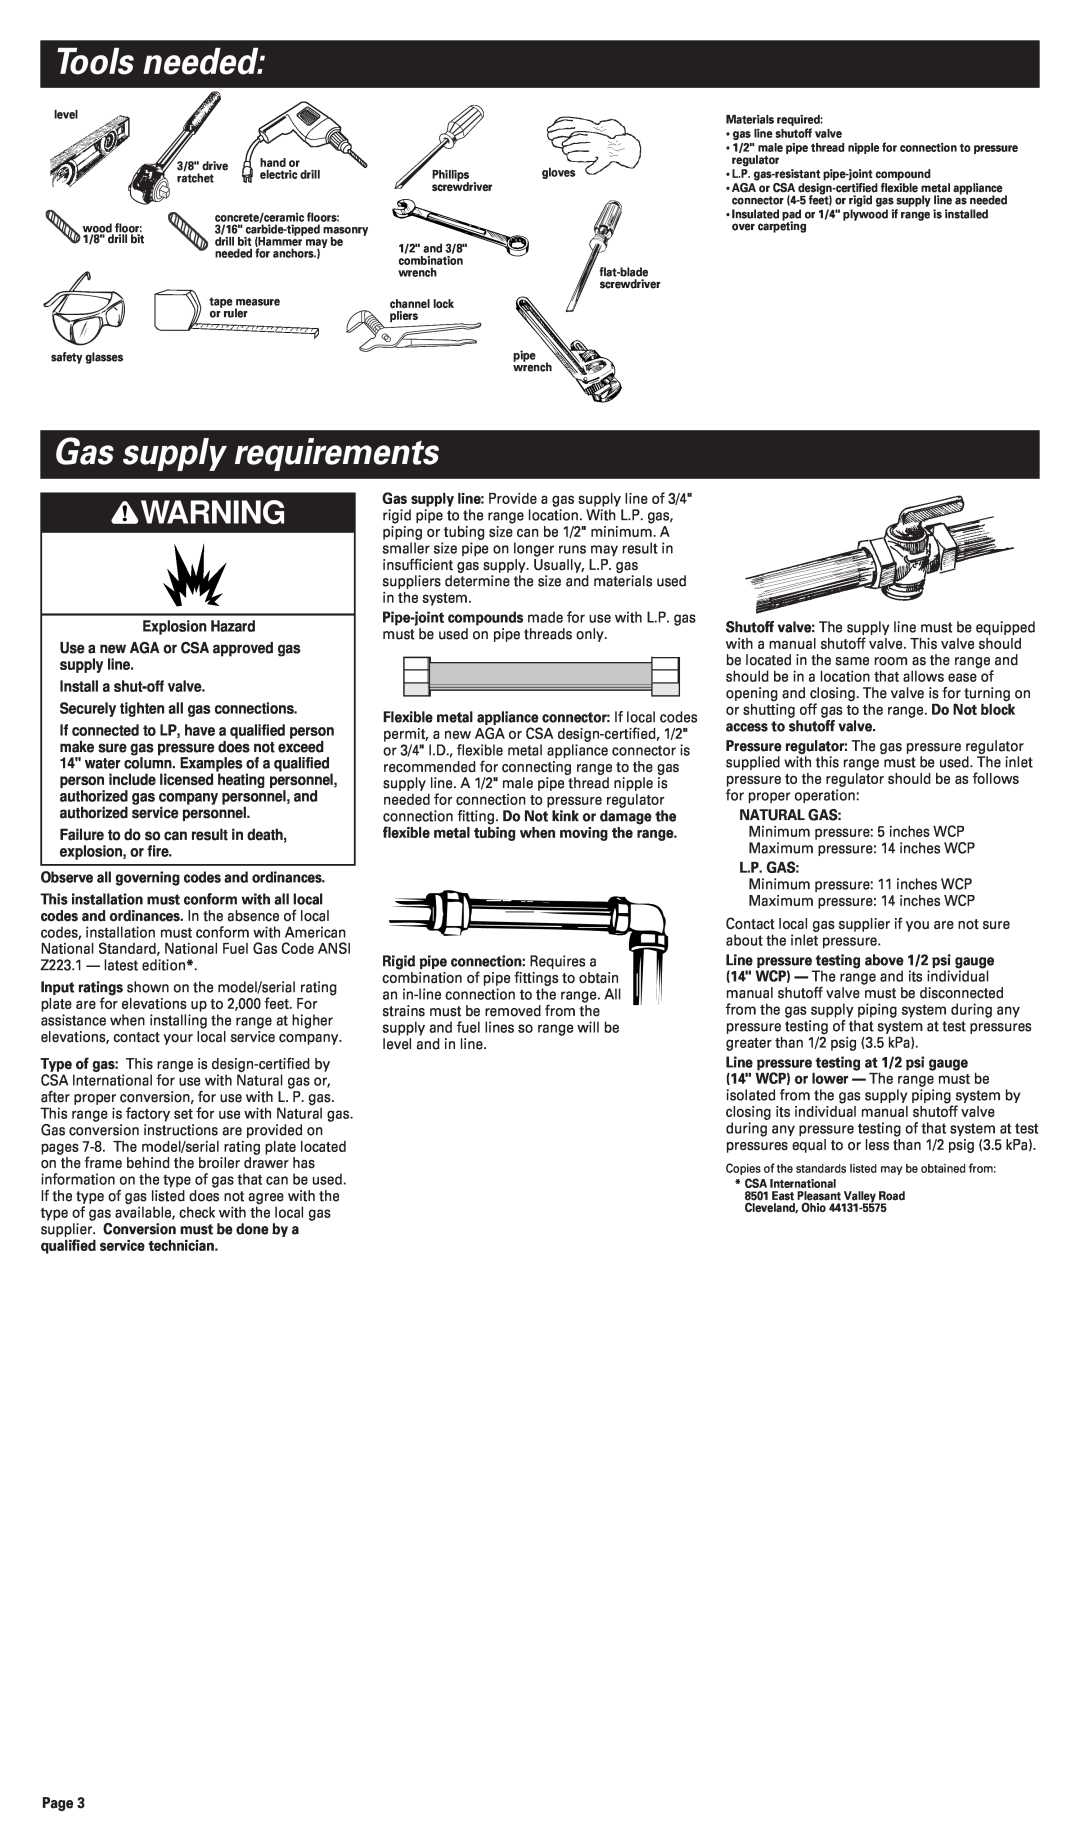 Whirlpool FGP300JN0 Tools needed, Gas supply requirements, Explosion Hazard, Use a new AGA or CSA approved gas supply line 